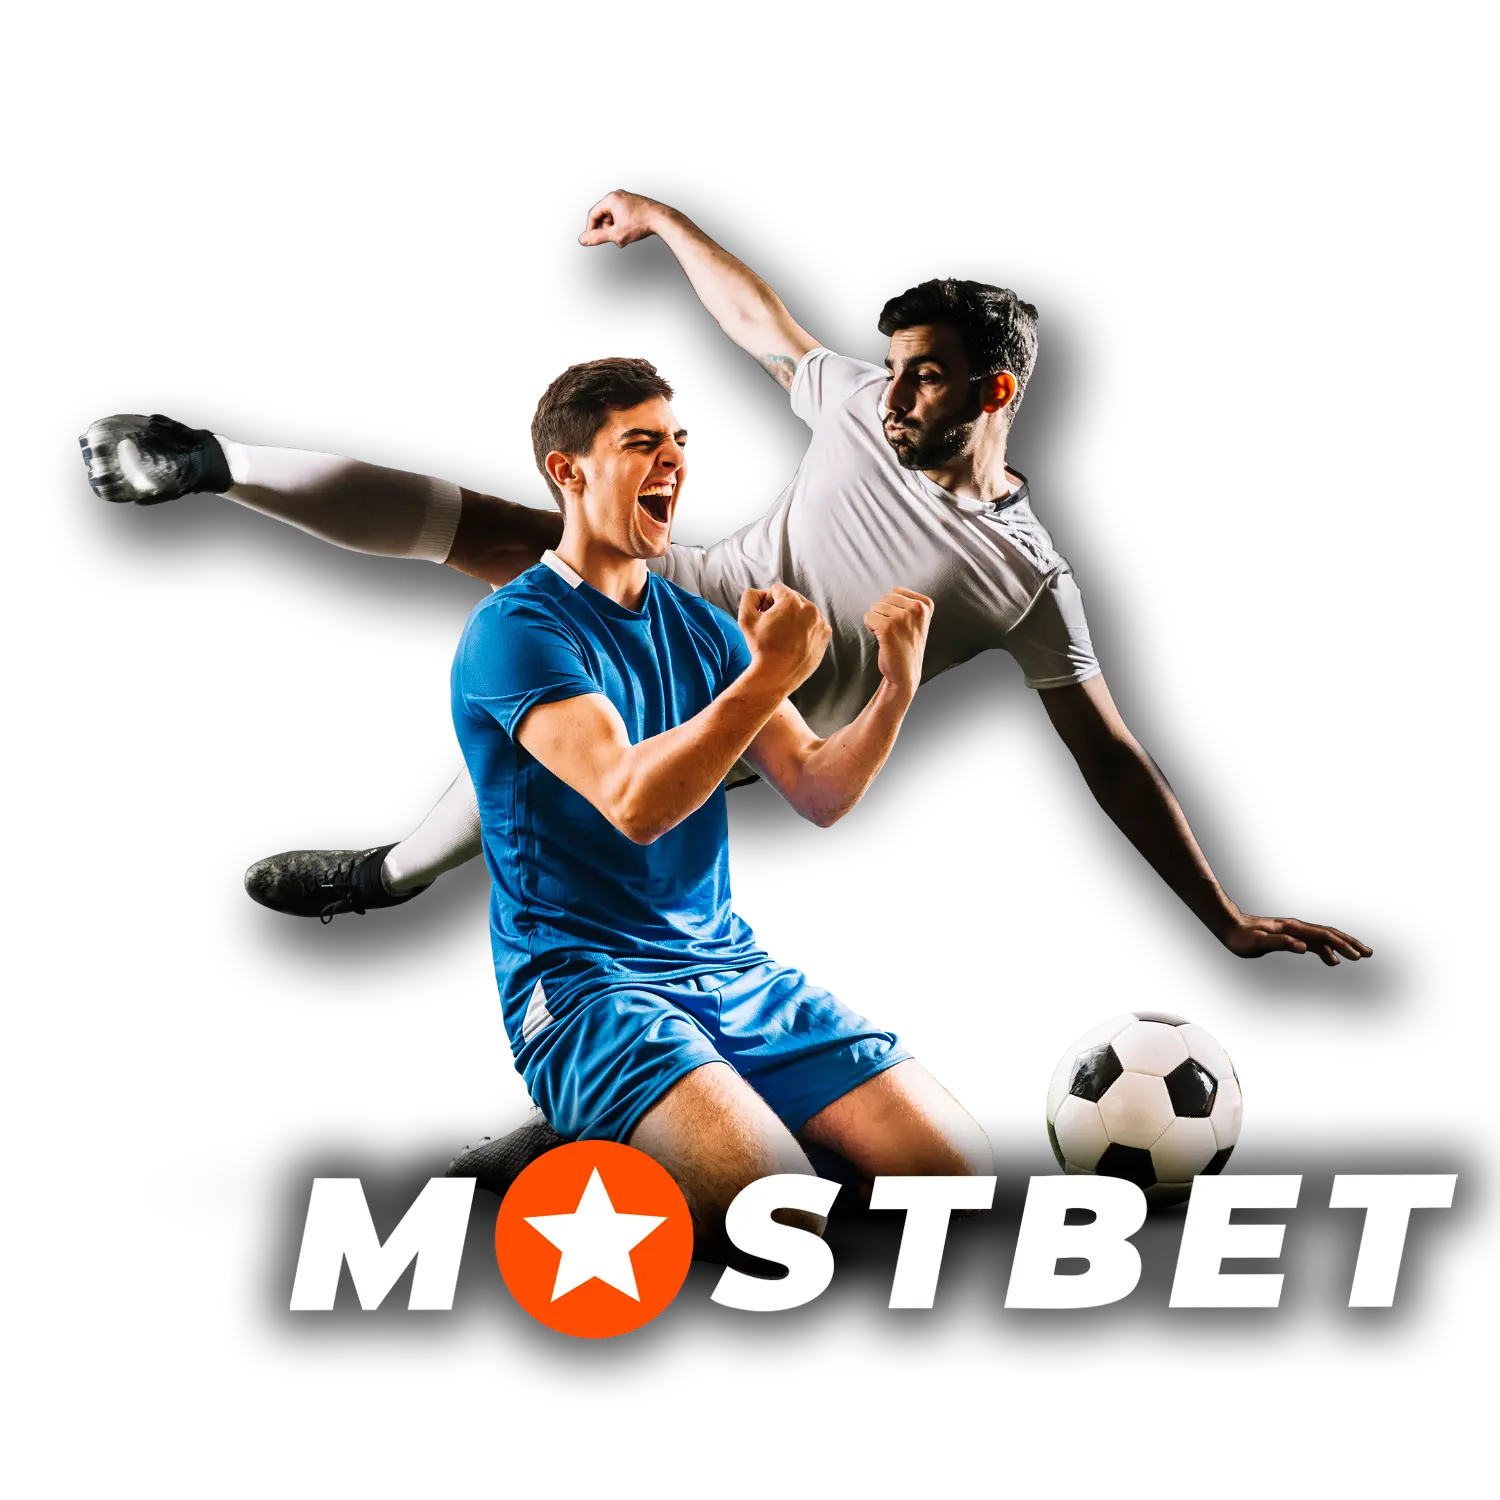 Read This To Change How You Mostbet Betting and Casino in Turkey